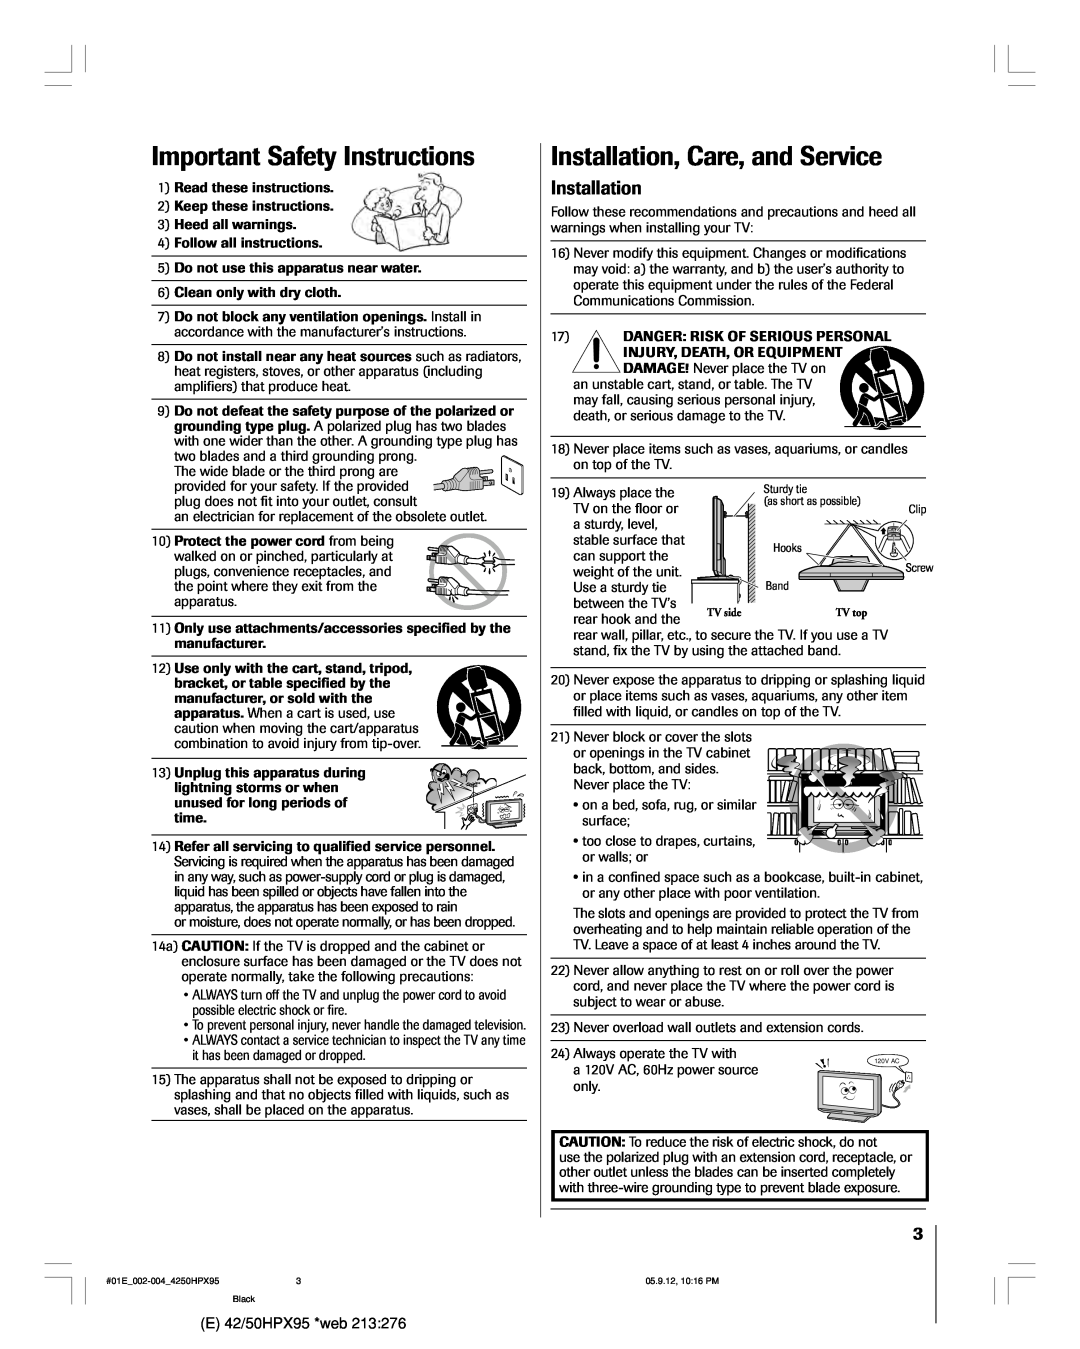 Toshiba 42HPX95 owner manual Important Safety Instructions, Installation, Care, and Service 